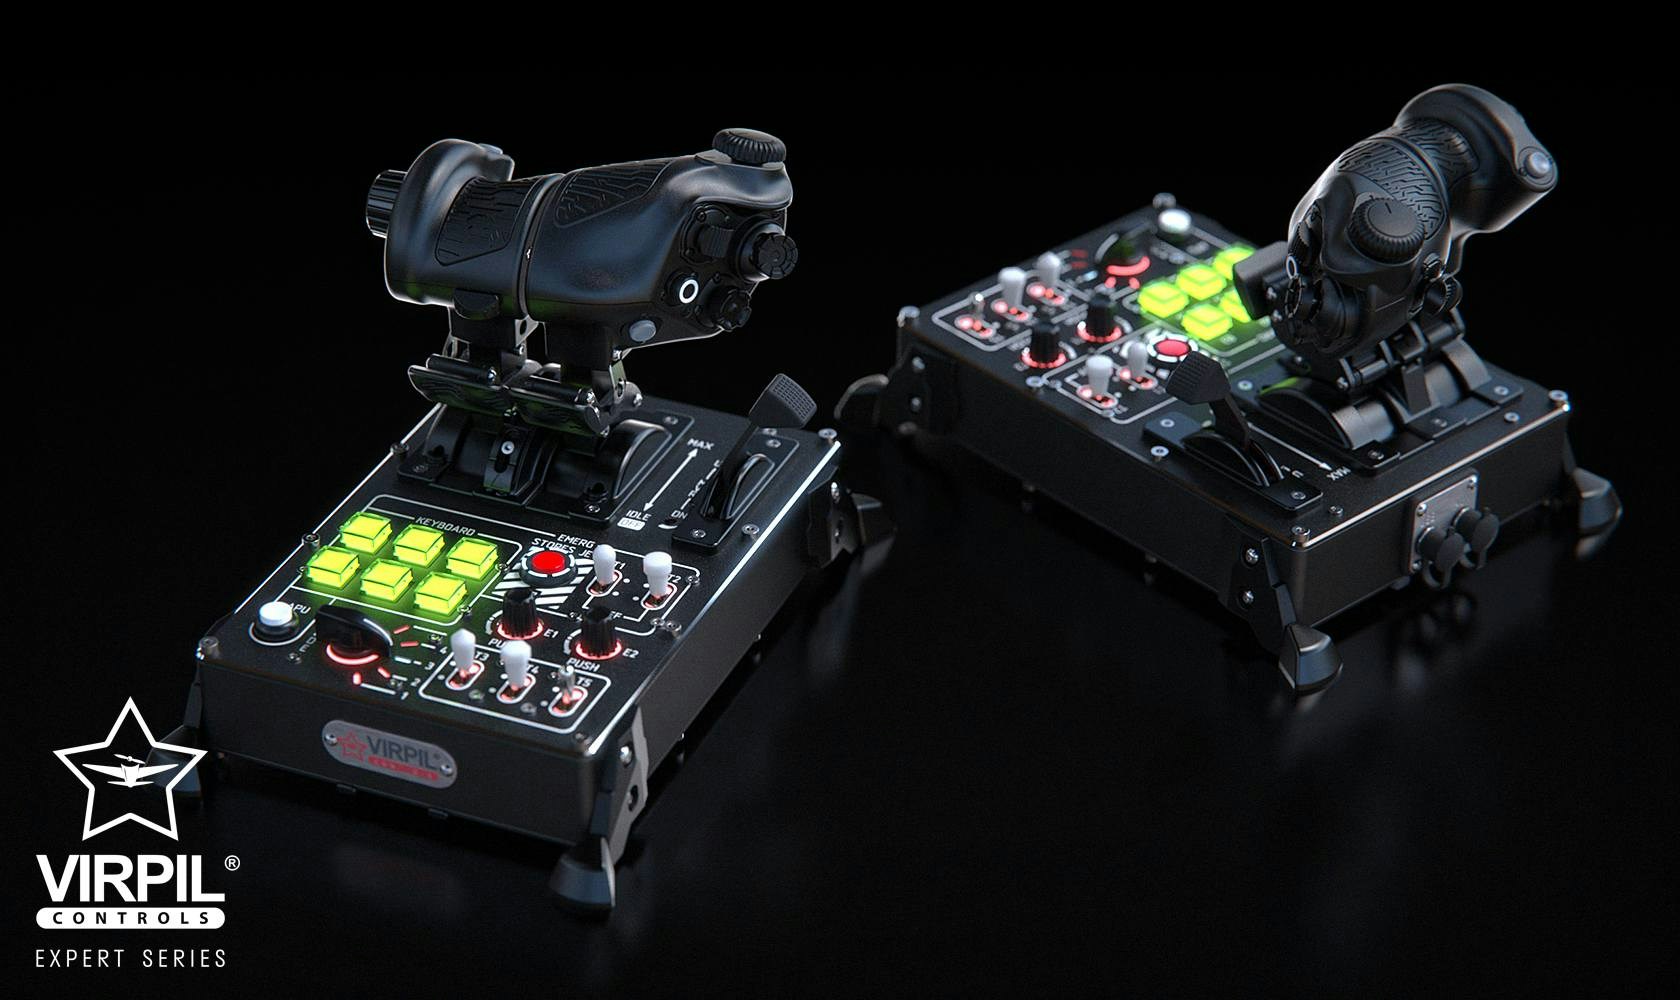 VIRPIL announces the new Expert Throttle and Grip series